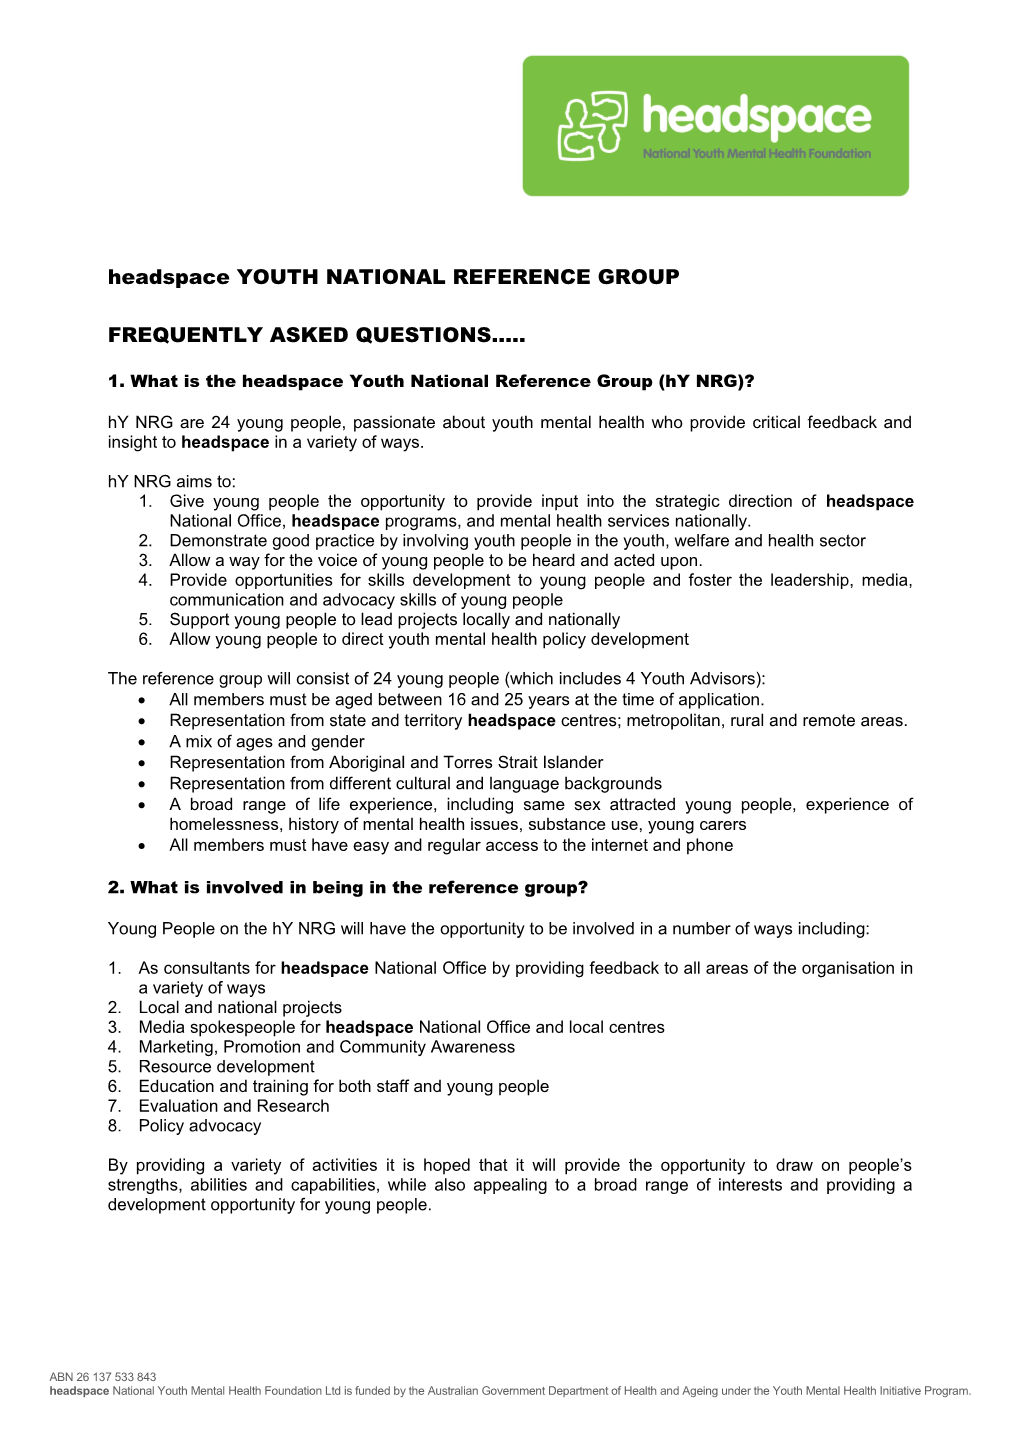 Headspace YOUTH NATIONAL REFERENCE GROUP